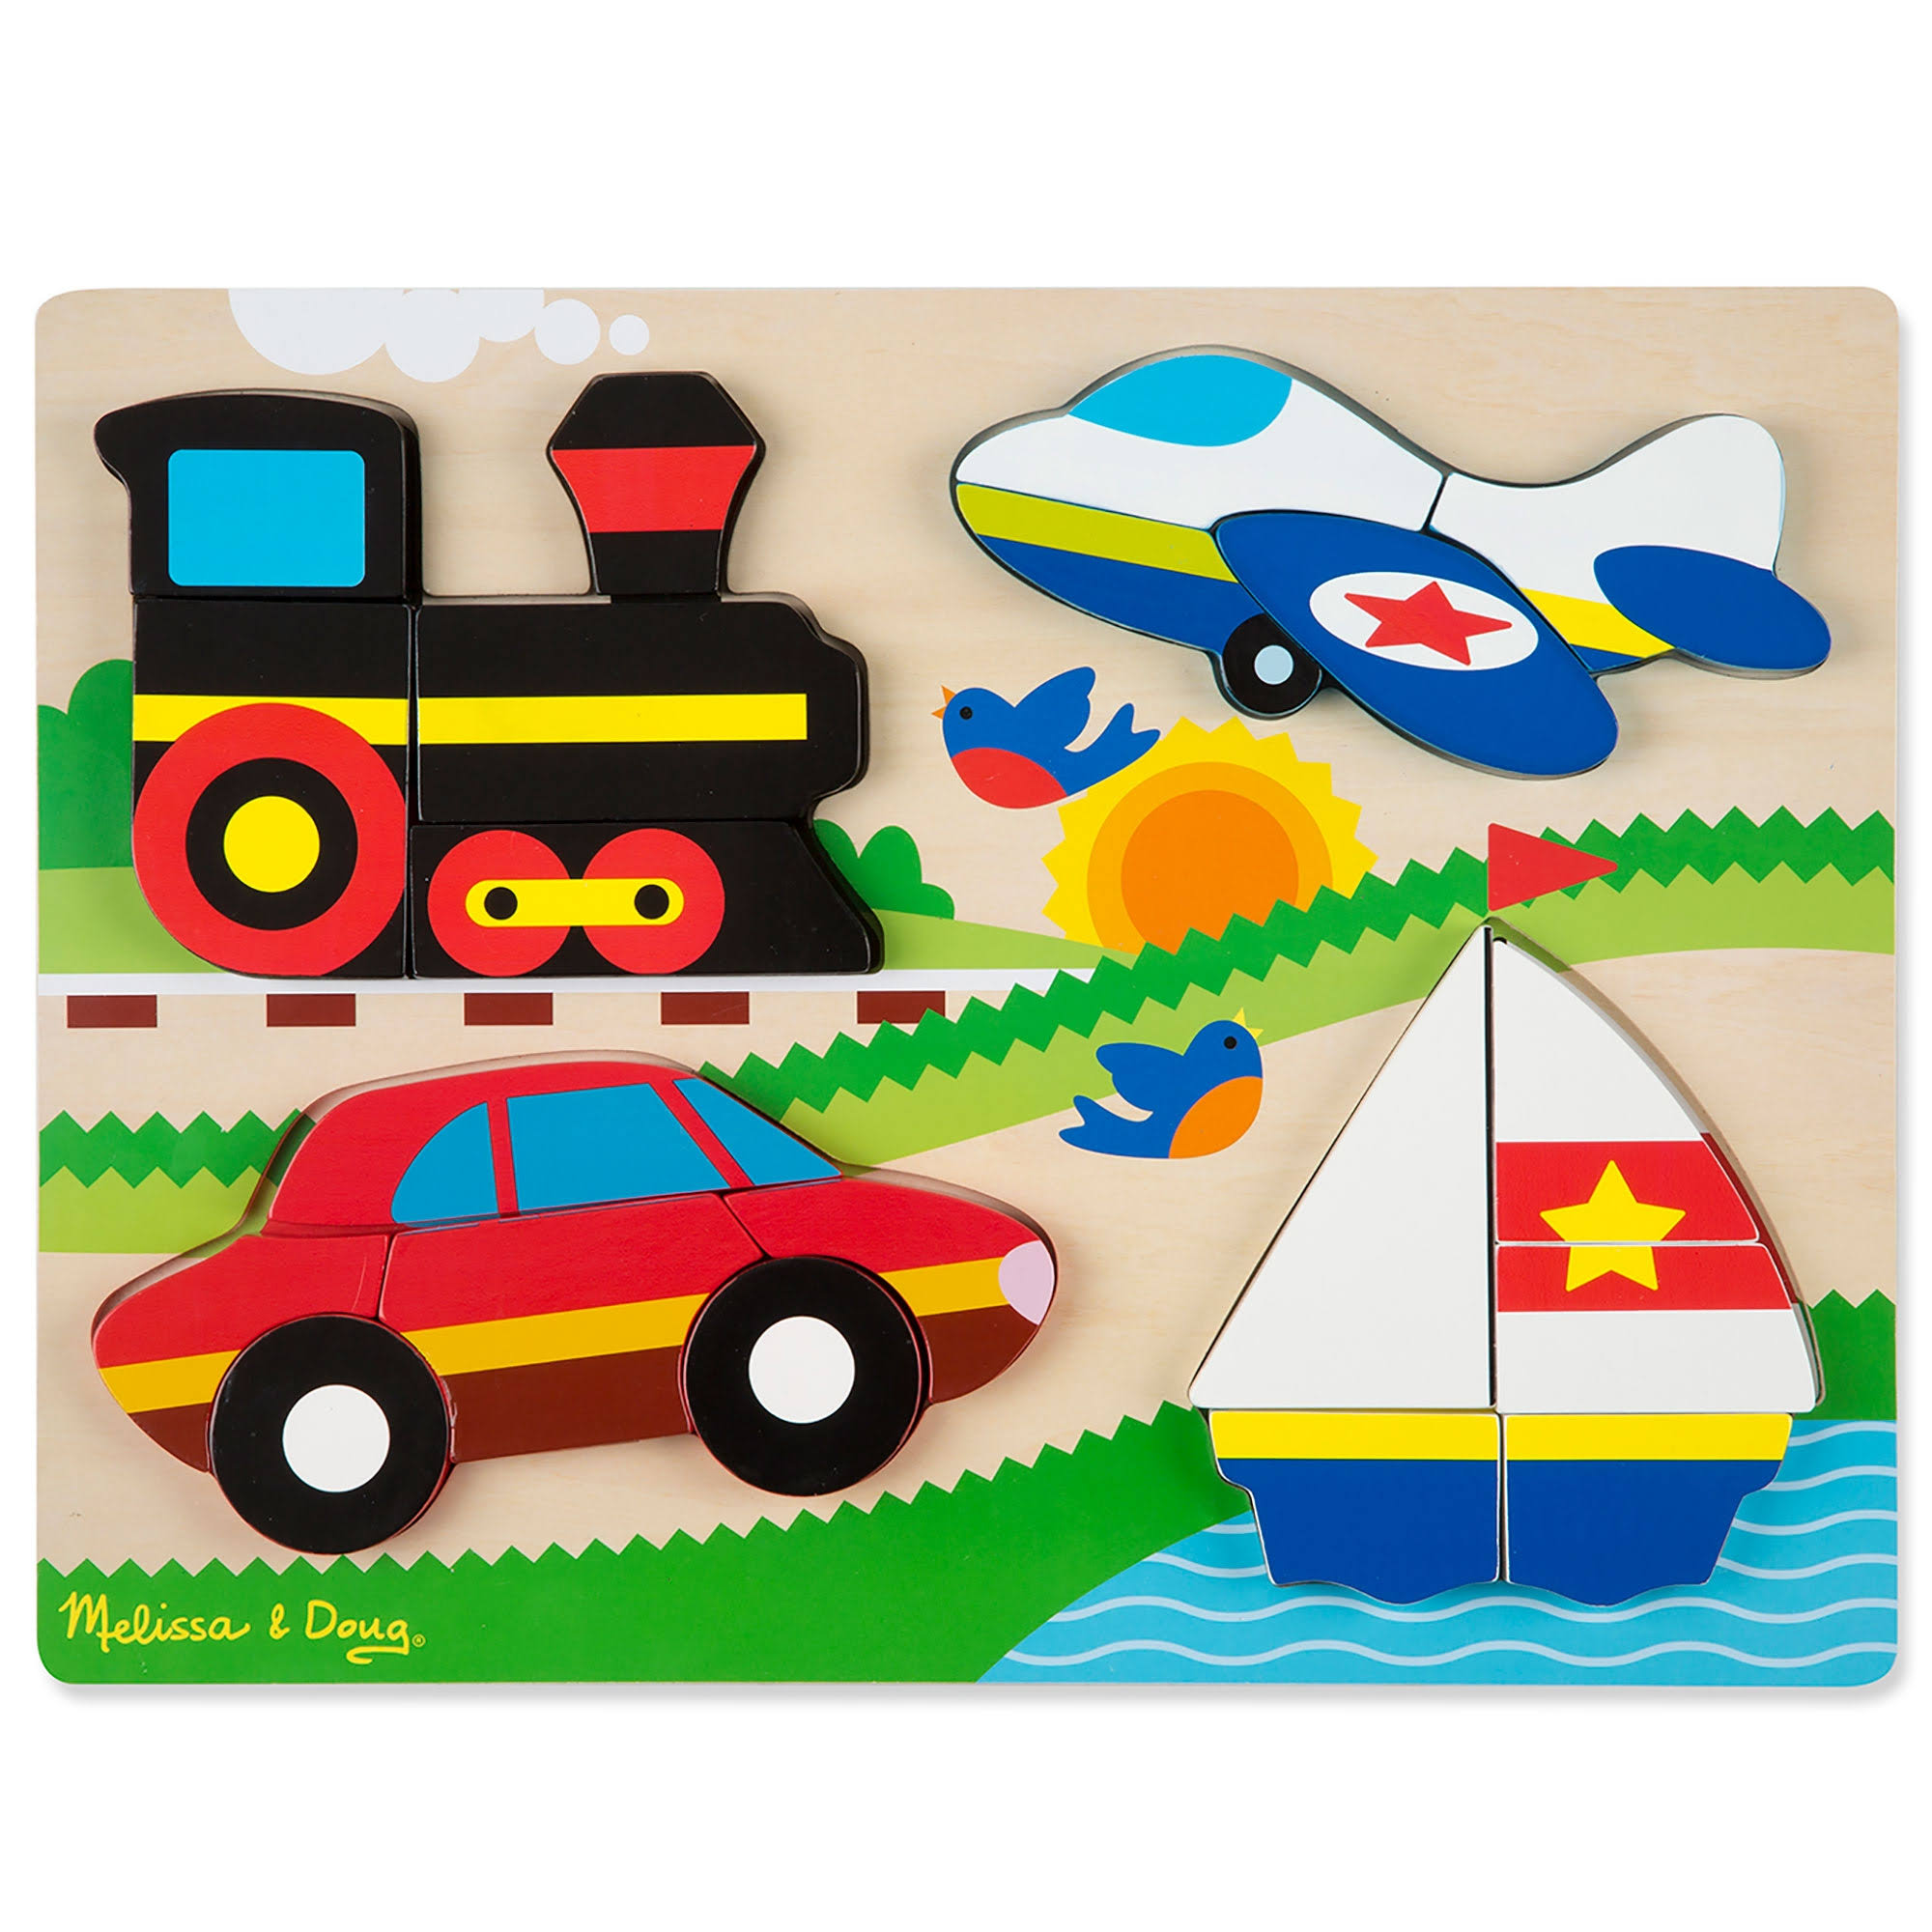 Melissa and Doug Vehicles Wooden Chunky Jigsaw Puzzle - 20pc